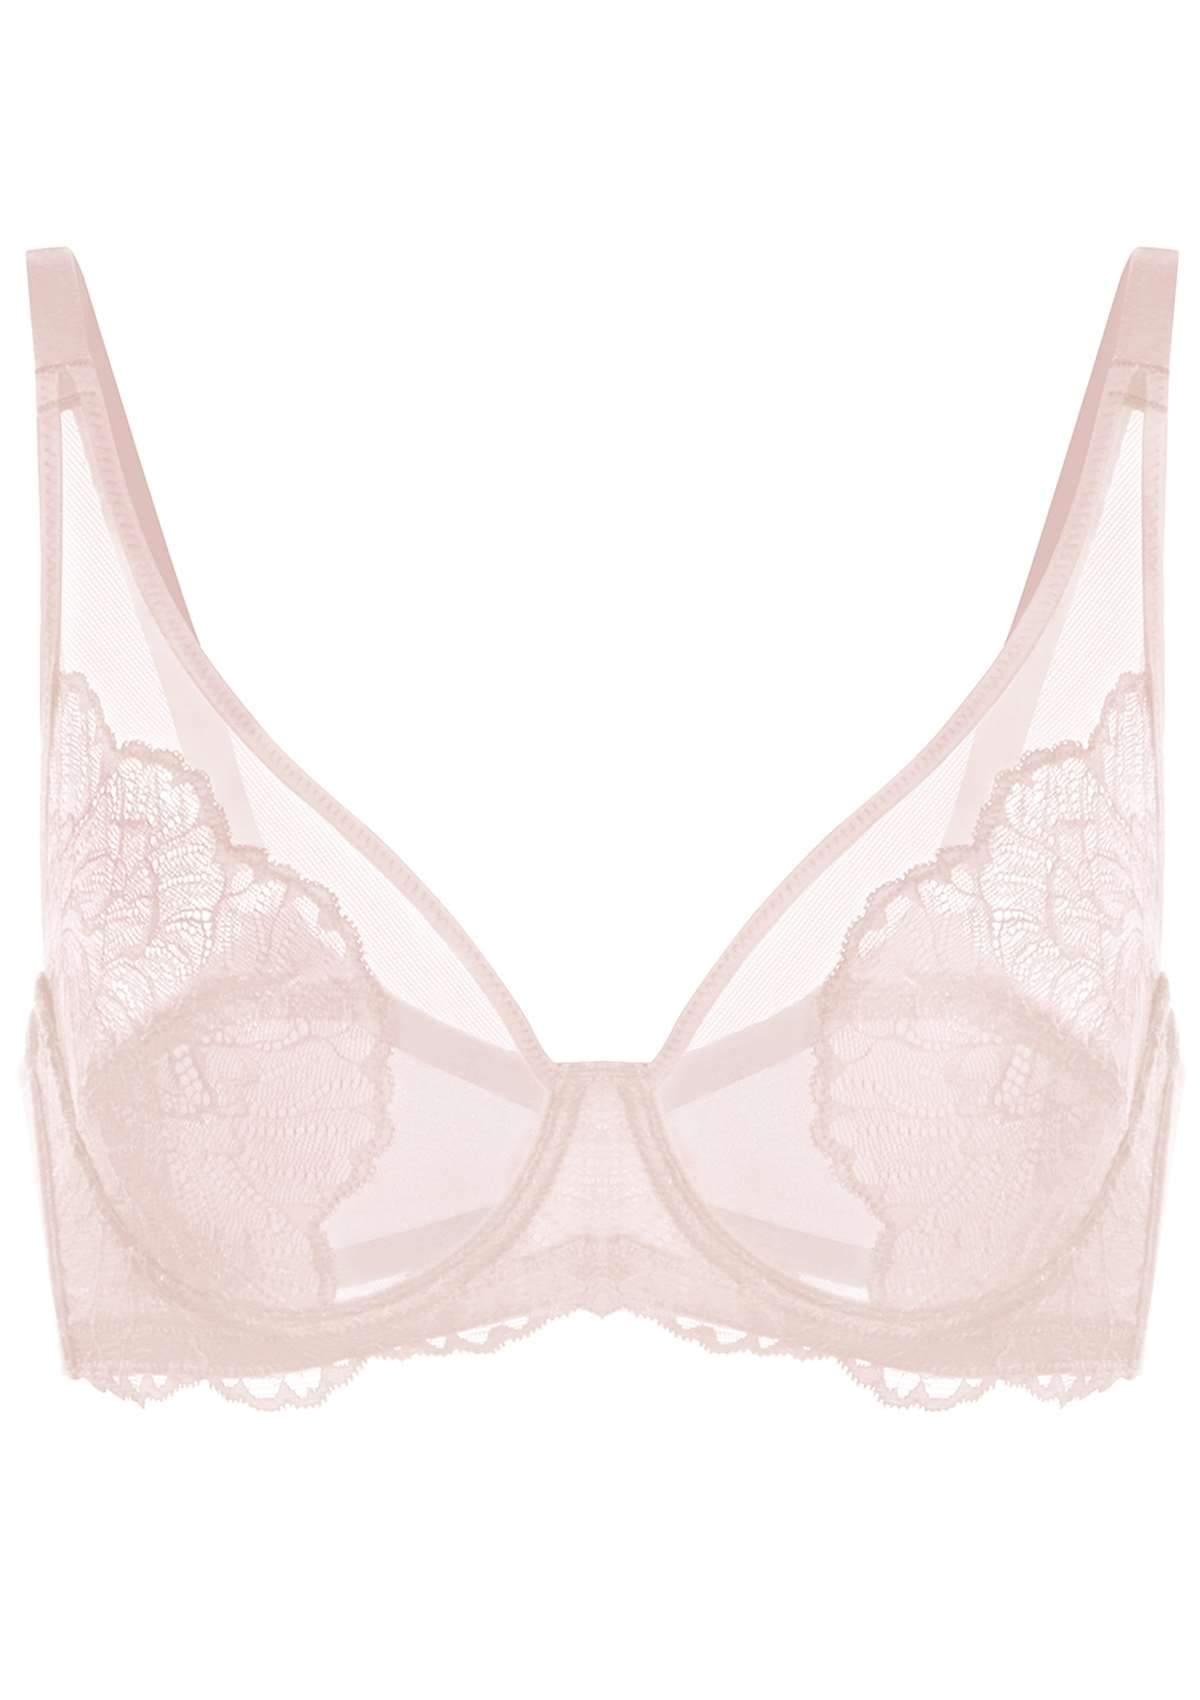 HSIA Blossom Lace Bra And Panties Set: Best Bra For Large Busts - Dark Pink / 34 / D